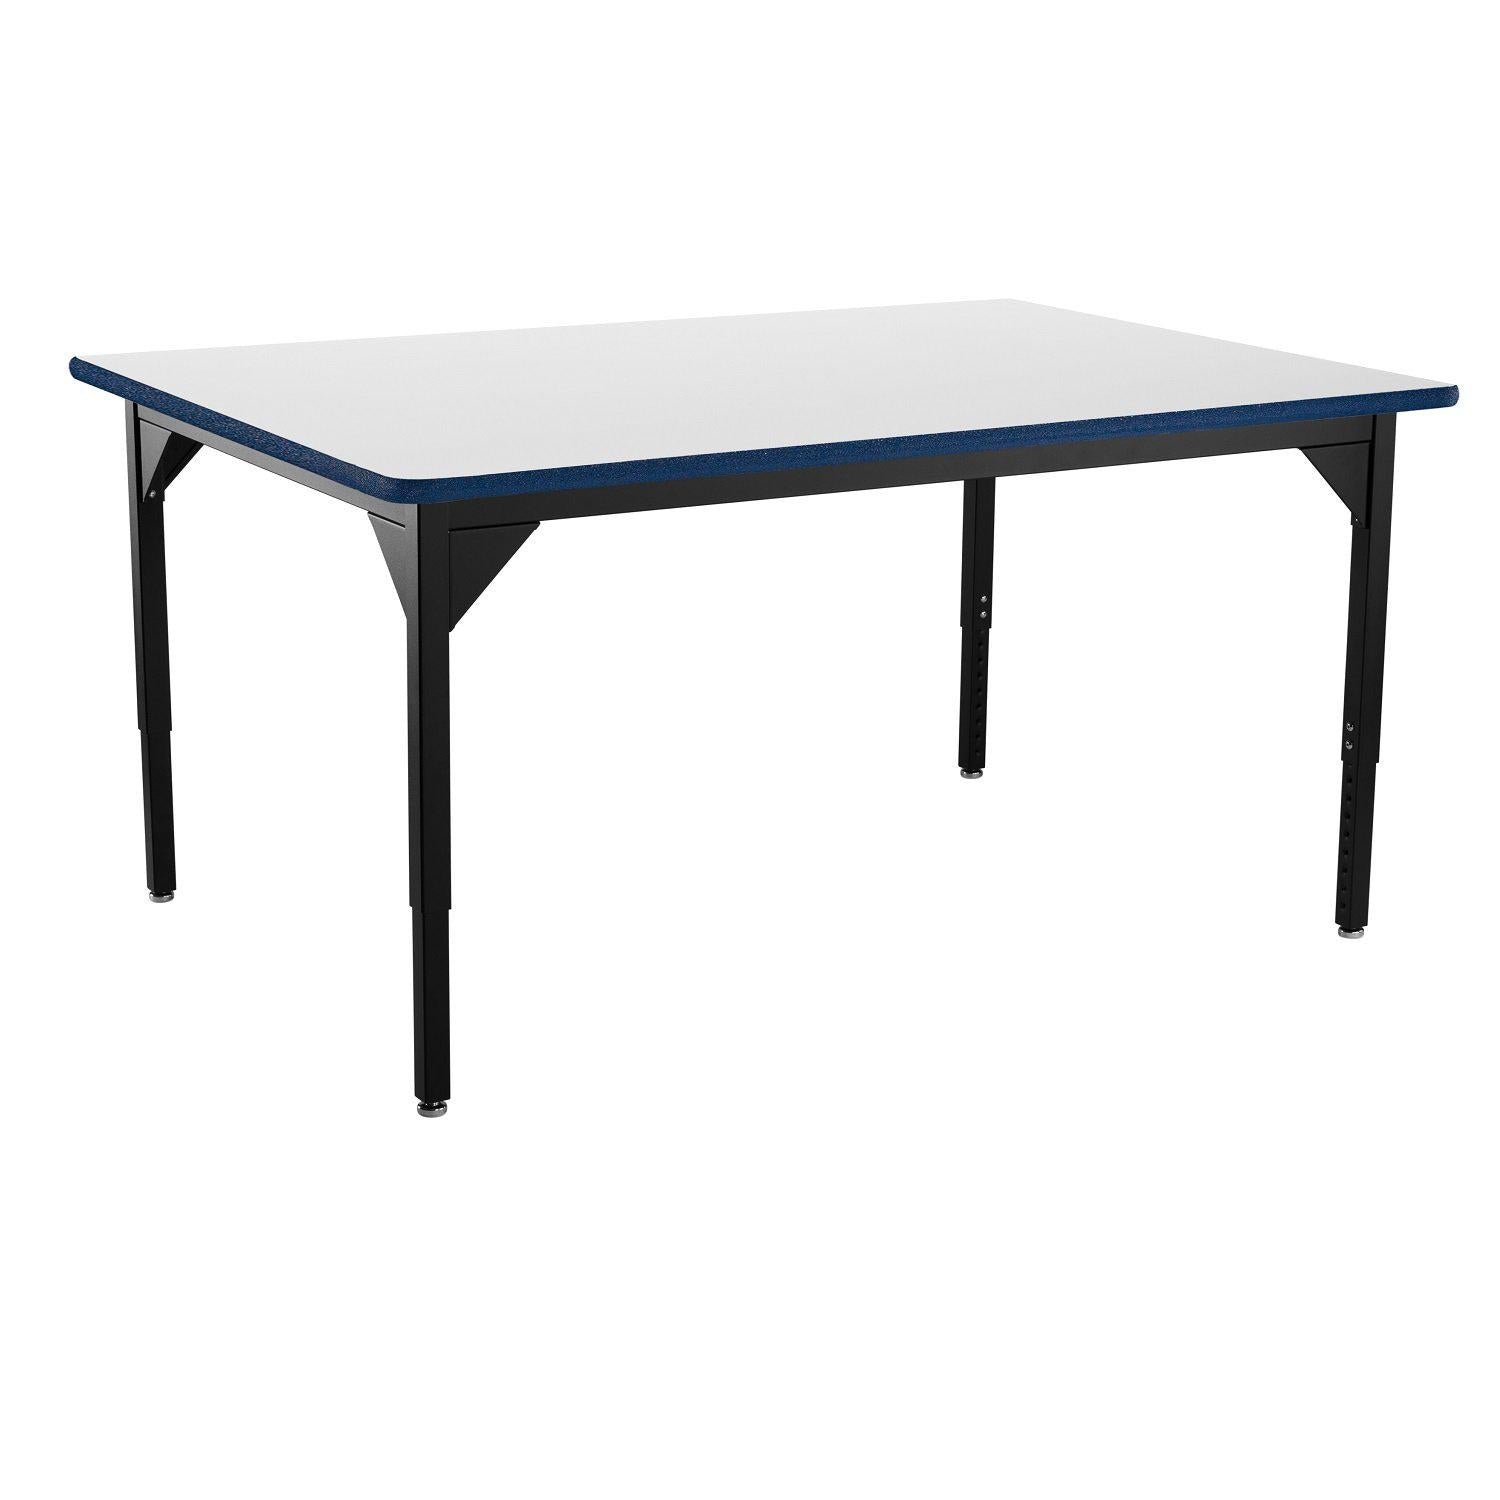 Heavy-Duty Height-Adjustable Utility Table, Black Frame, 42" x 60", Supreme High-Pressure Laminate Top with Black ProtectEdge